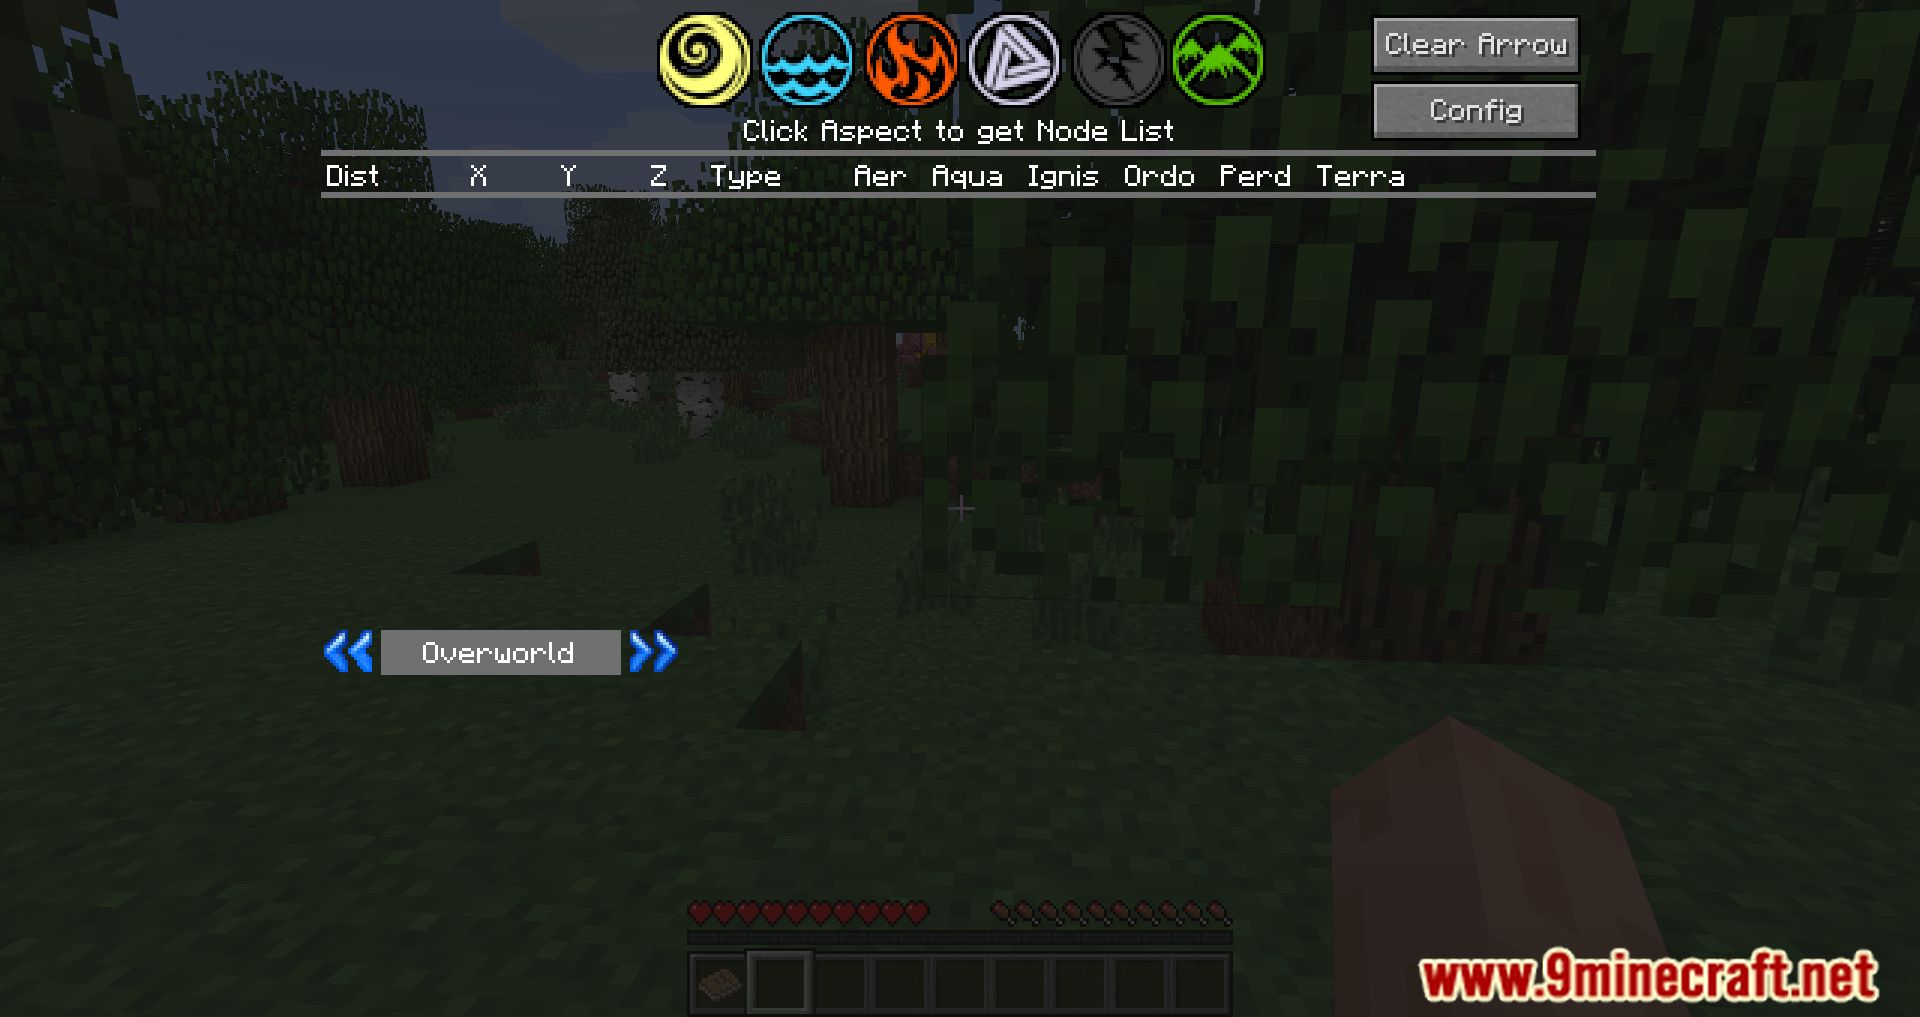 CozRPG Evolved Modpack (1.7.10) - A Modpack That Emphasizes Magic And Adventure 6